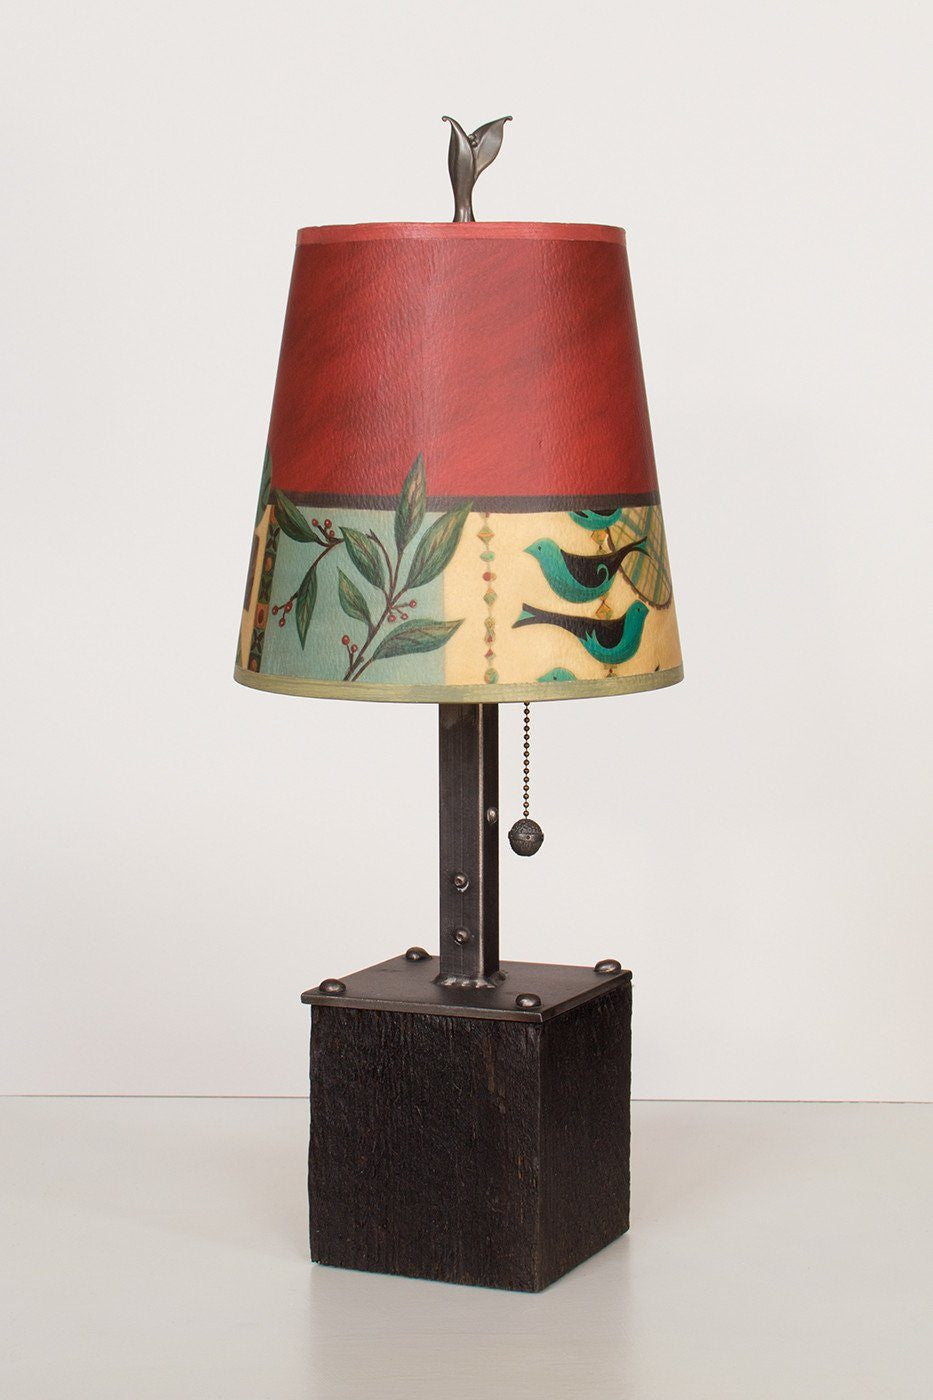 Steel Table Lamp on Reclaimed Wood with Small Drum Shade in New Capri Lit